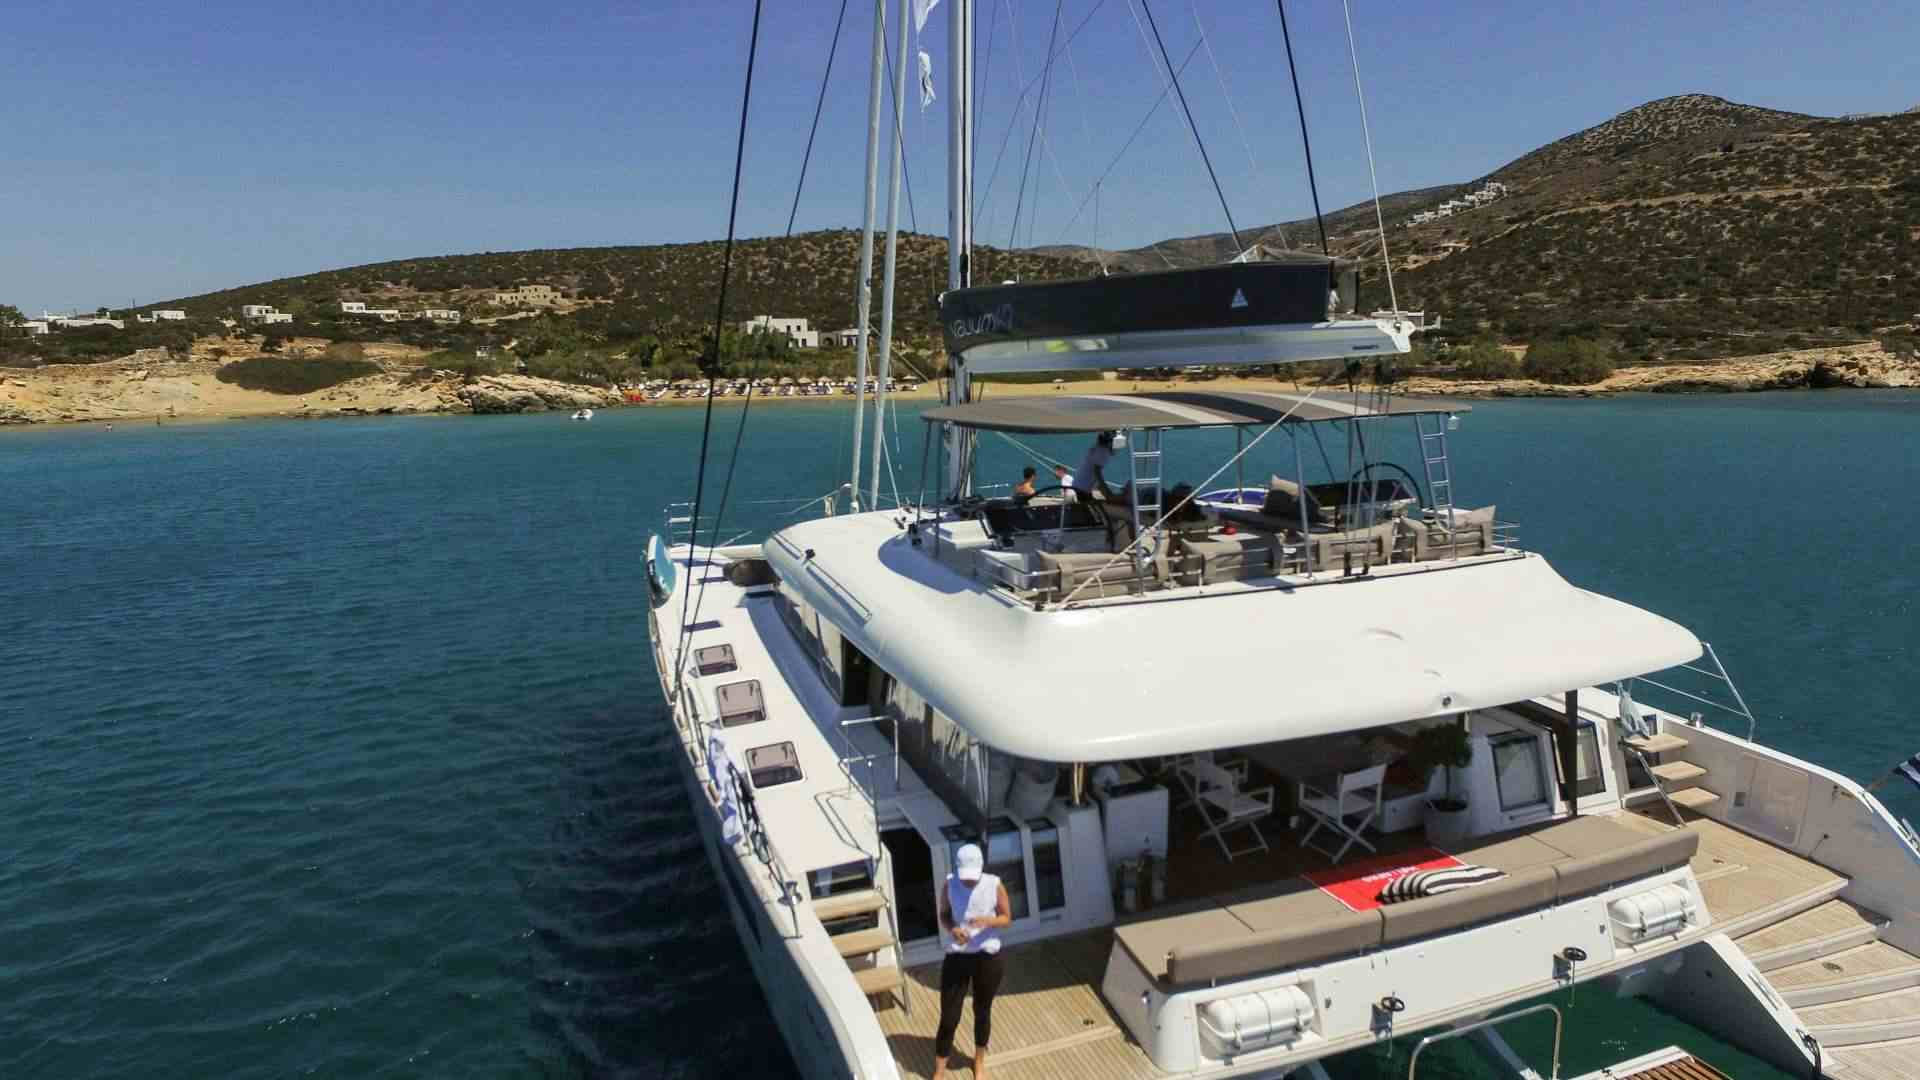 valium62 - Yacht Charter Nafplion & Boat hire in Greece 1